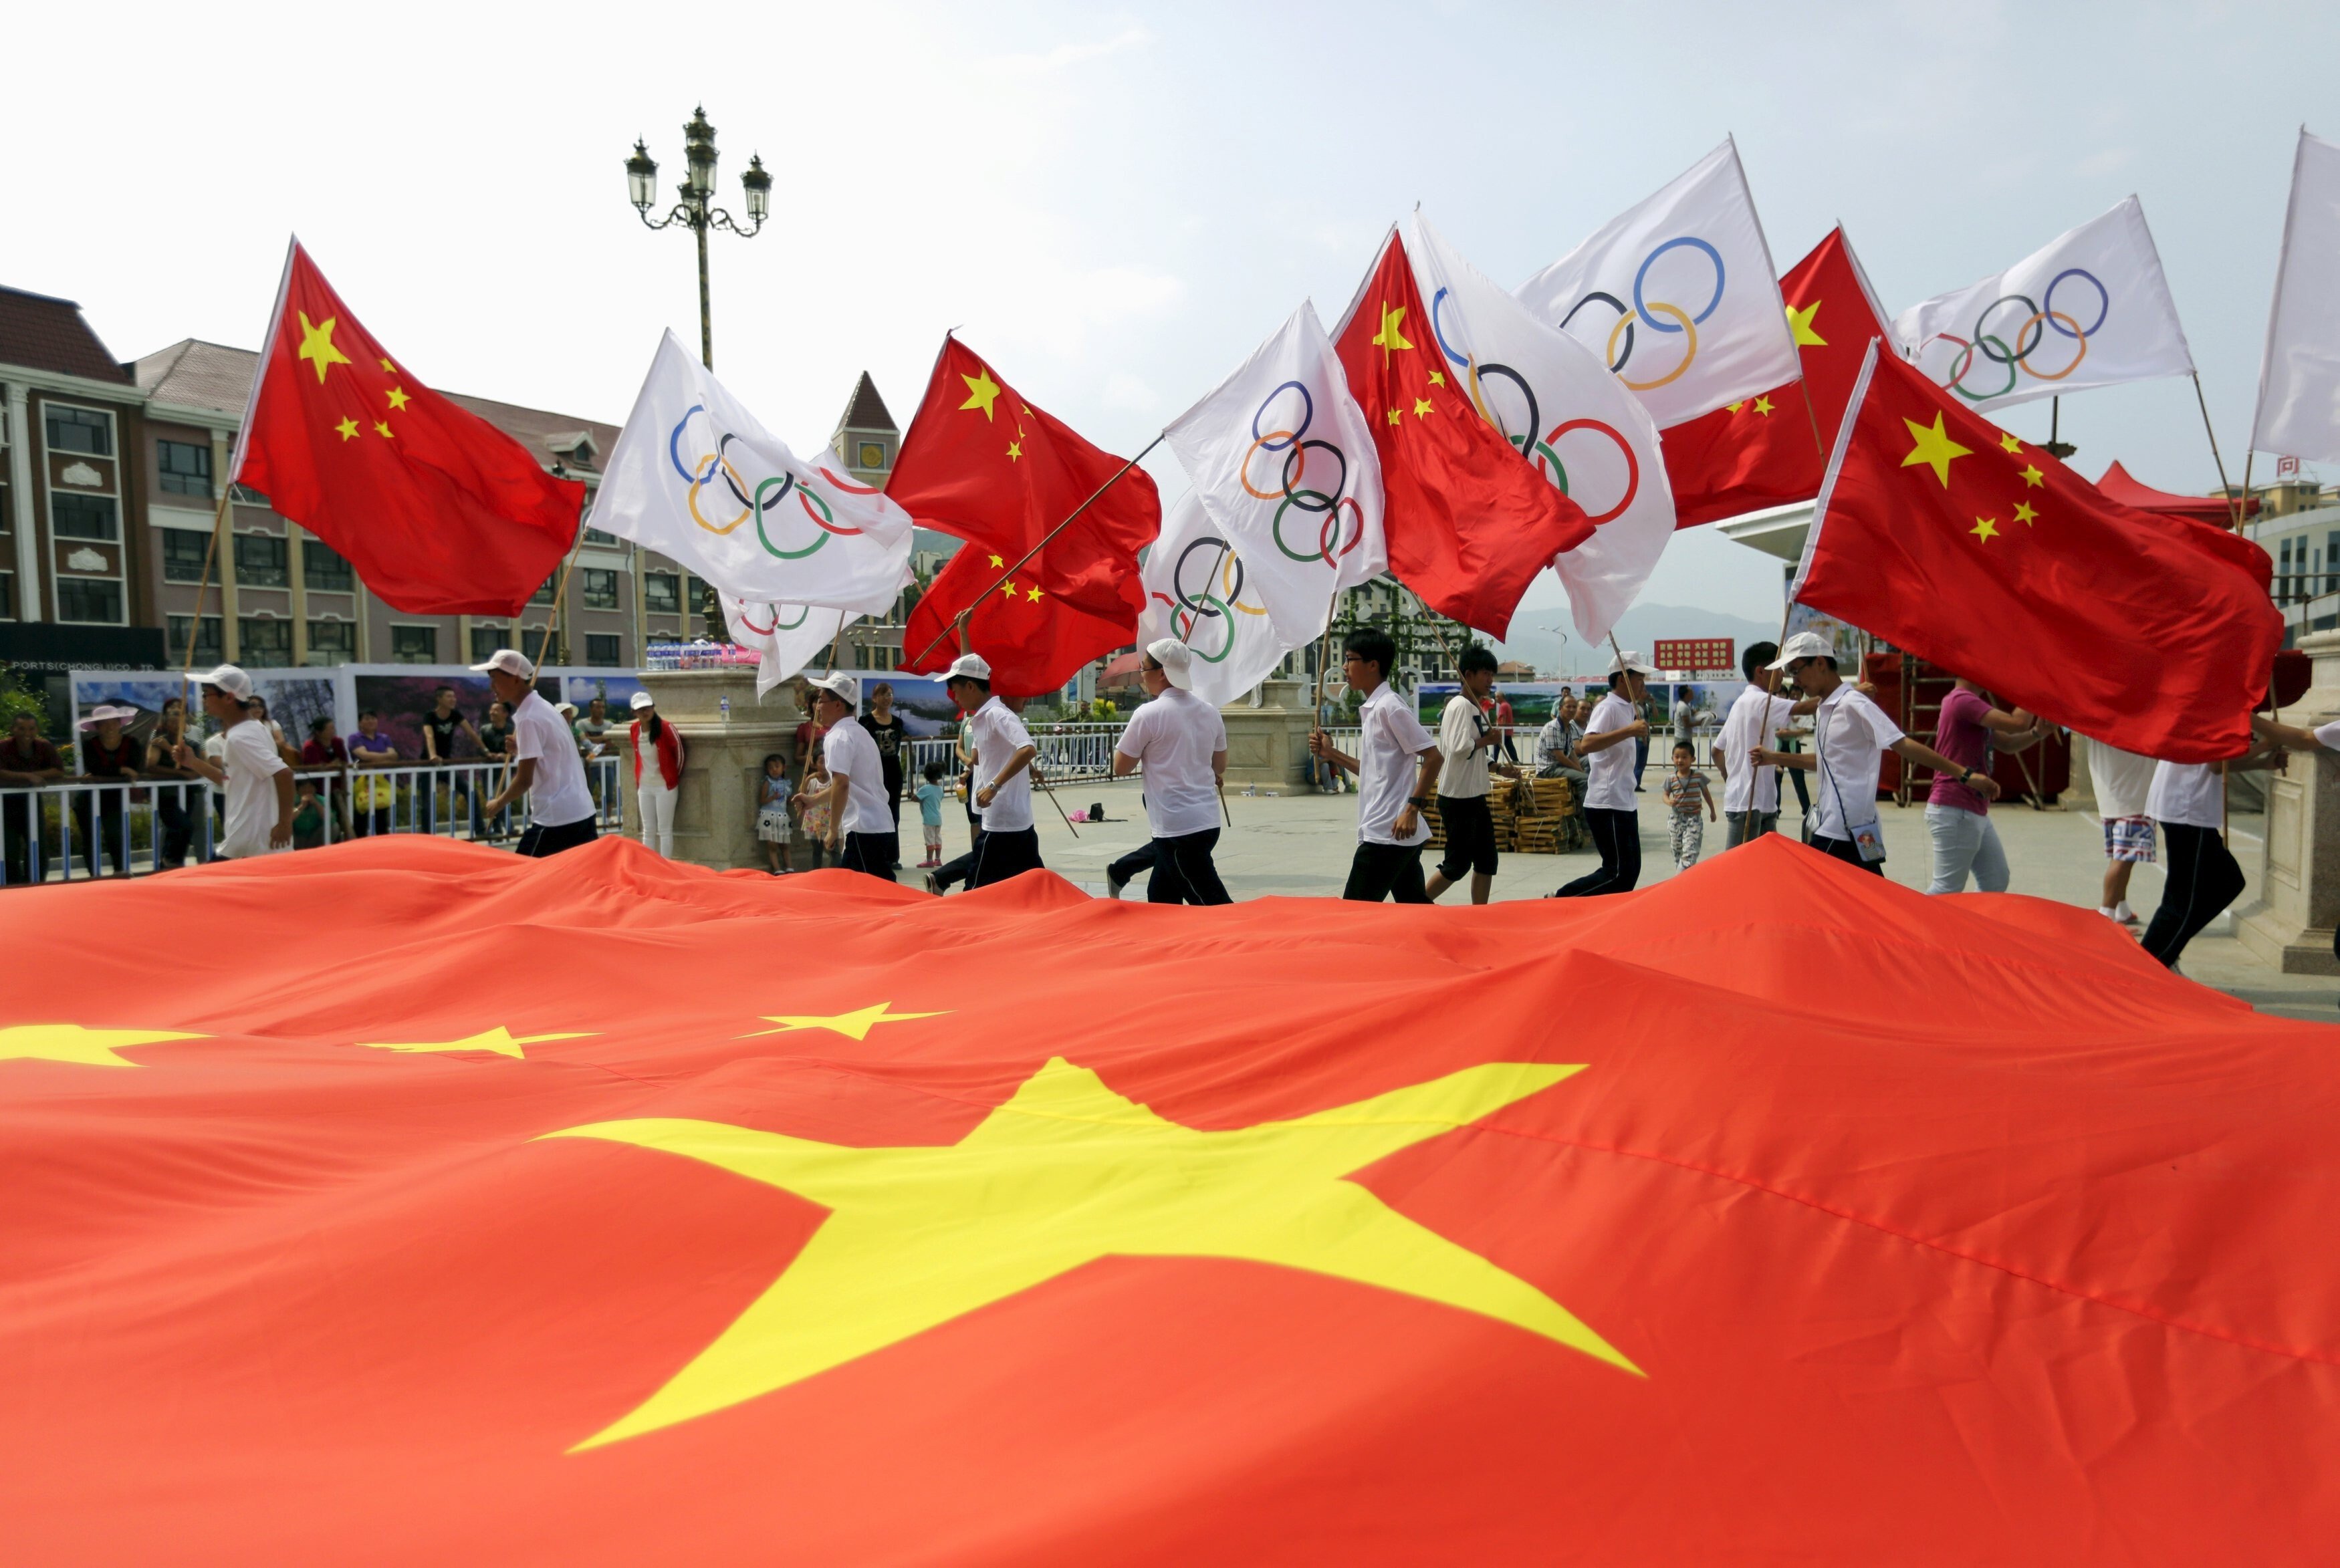 Residents hold Chinese and Olympics flags at a rehearsal for a celebration event in Zhangjiakou, which will join Beijing in hosting the 2022 Winter Olympic Games. Photo: Reuters